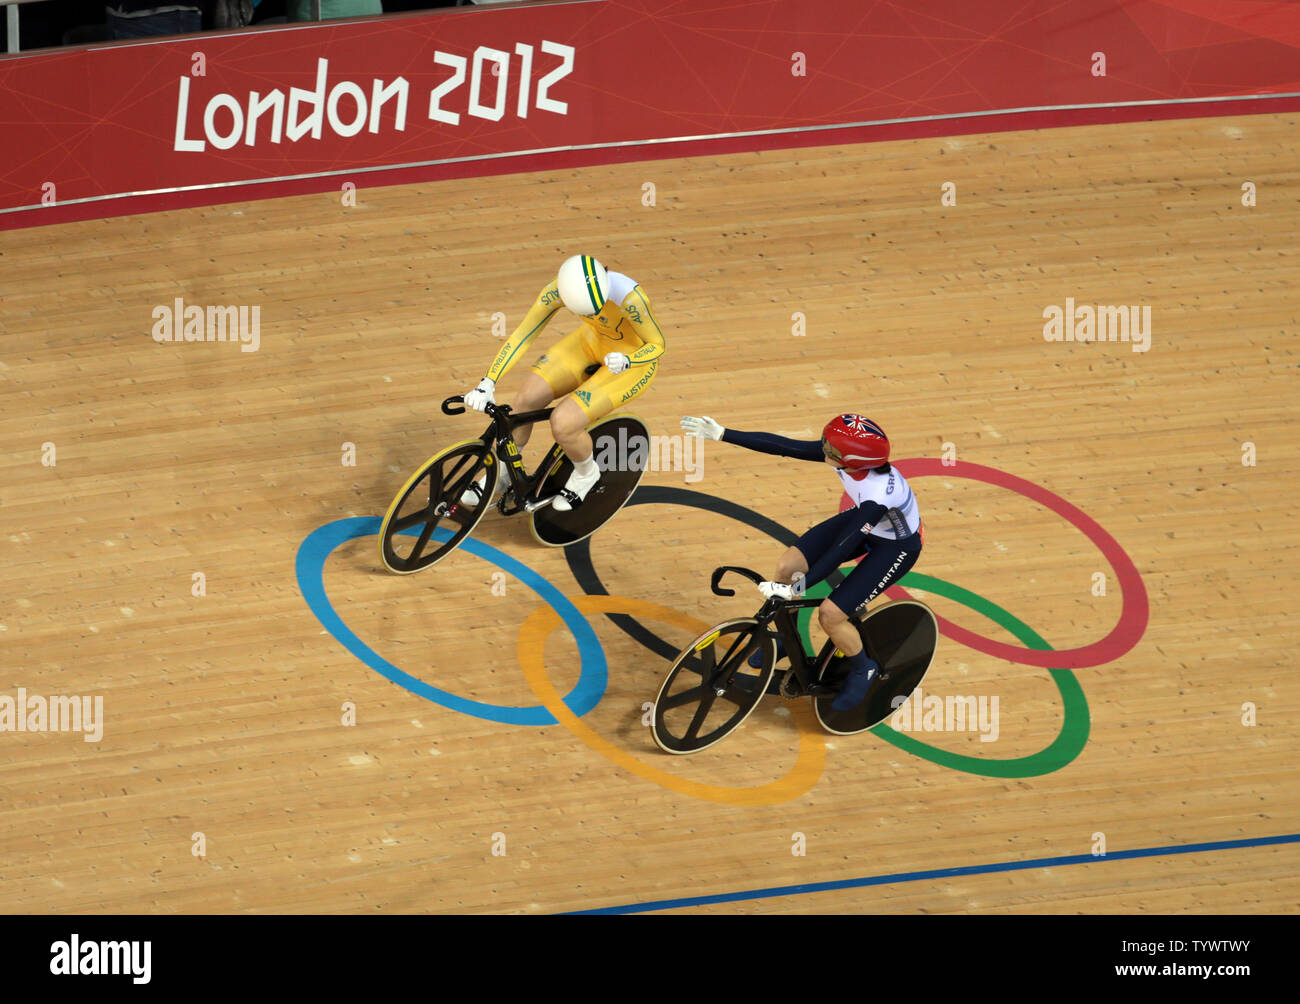 Great Britain's Victoria Pendleton offers her hand to Australia's Samantha Mears who won the Women's sprint at the Velodrome at the London 2012 Summer Olympics on August 7, 2012 in London.     UPI/Hugo Philpott Stock Photo